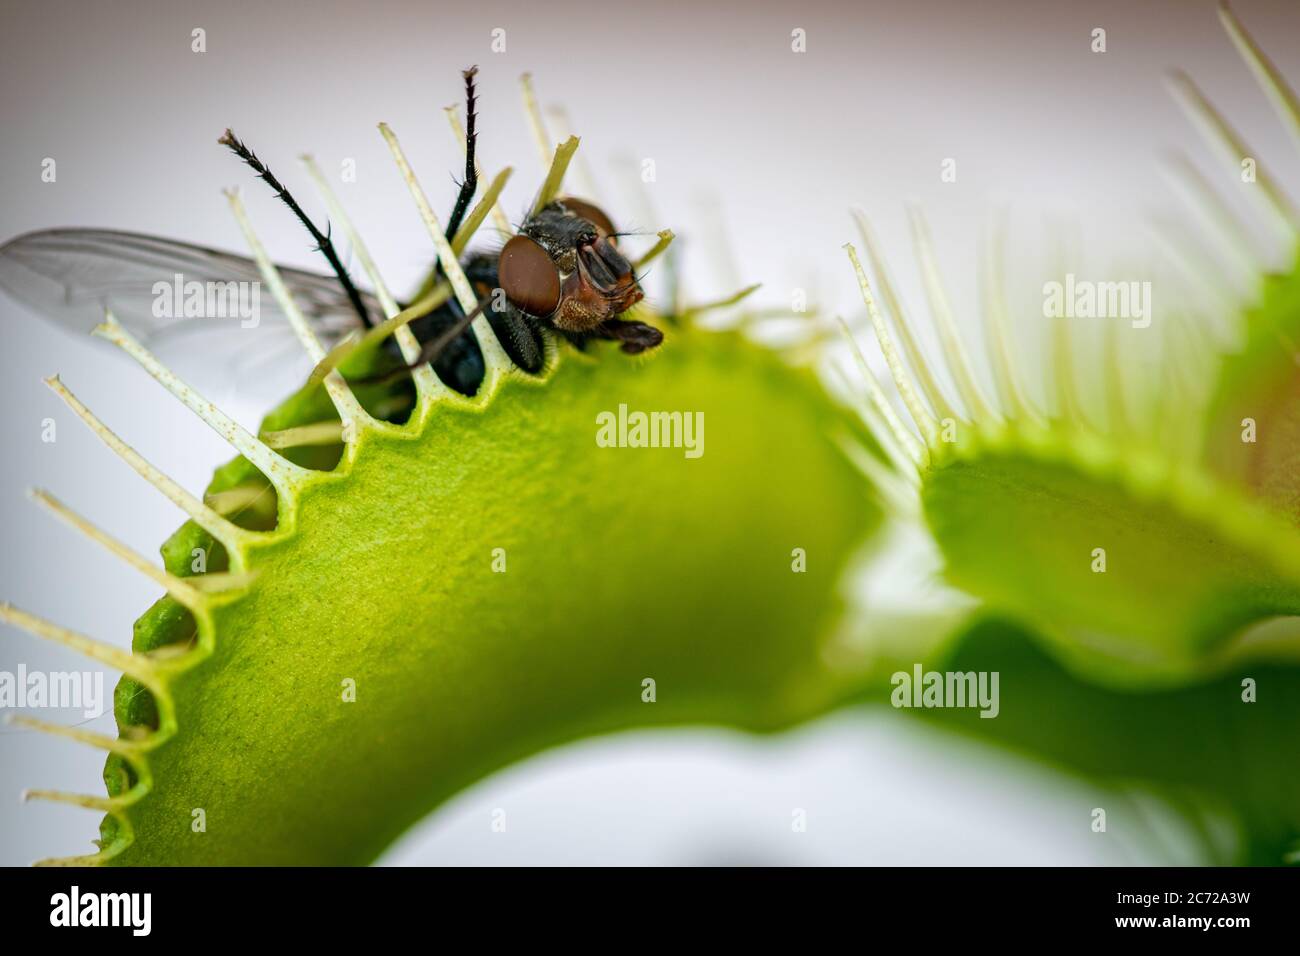 one common green bottle fly being eaten by a venus flytrap flower Stock Photo